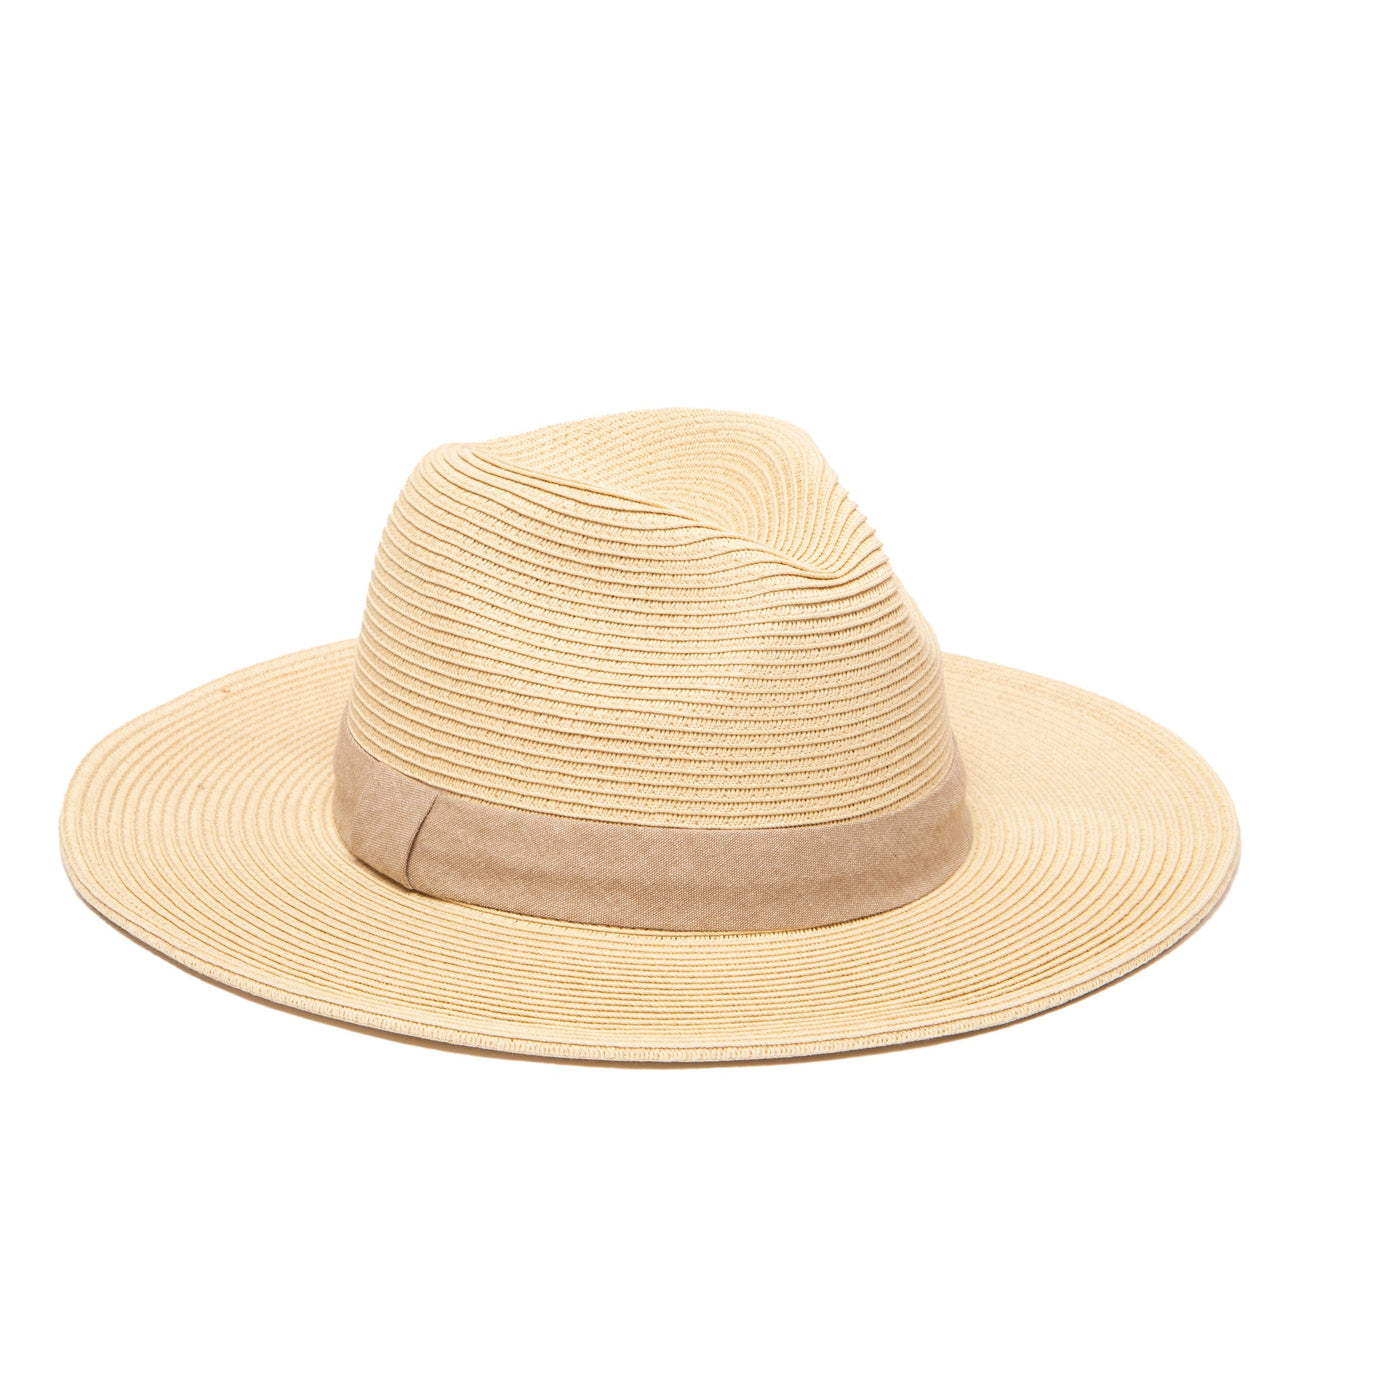 FEDORA - The Out Of Office Fedora